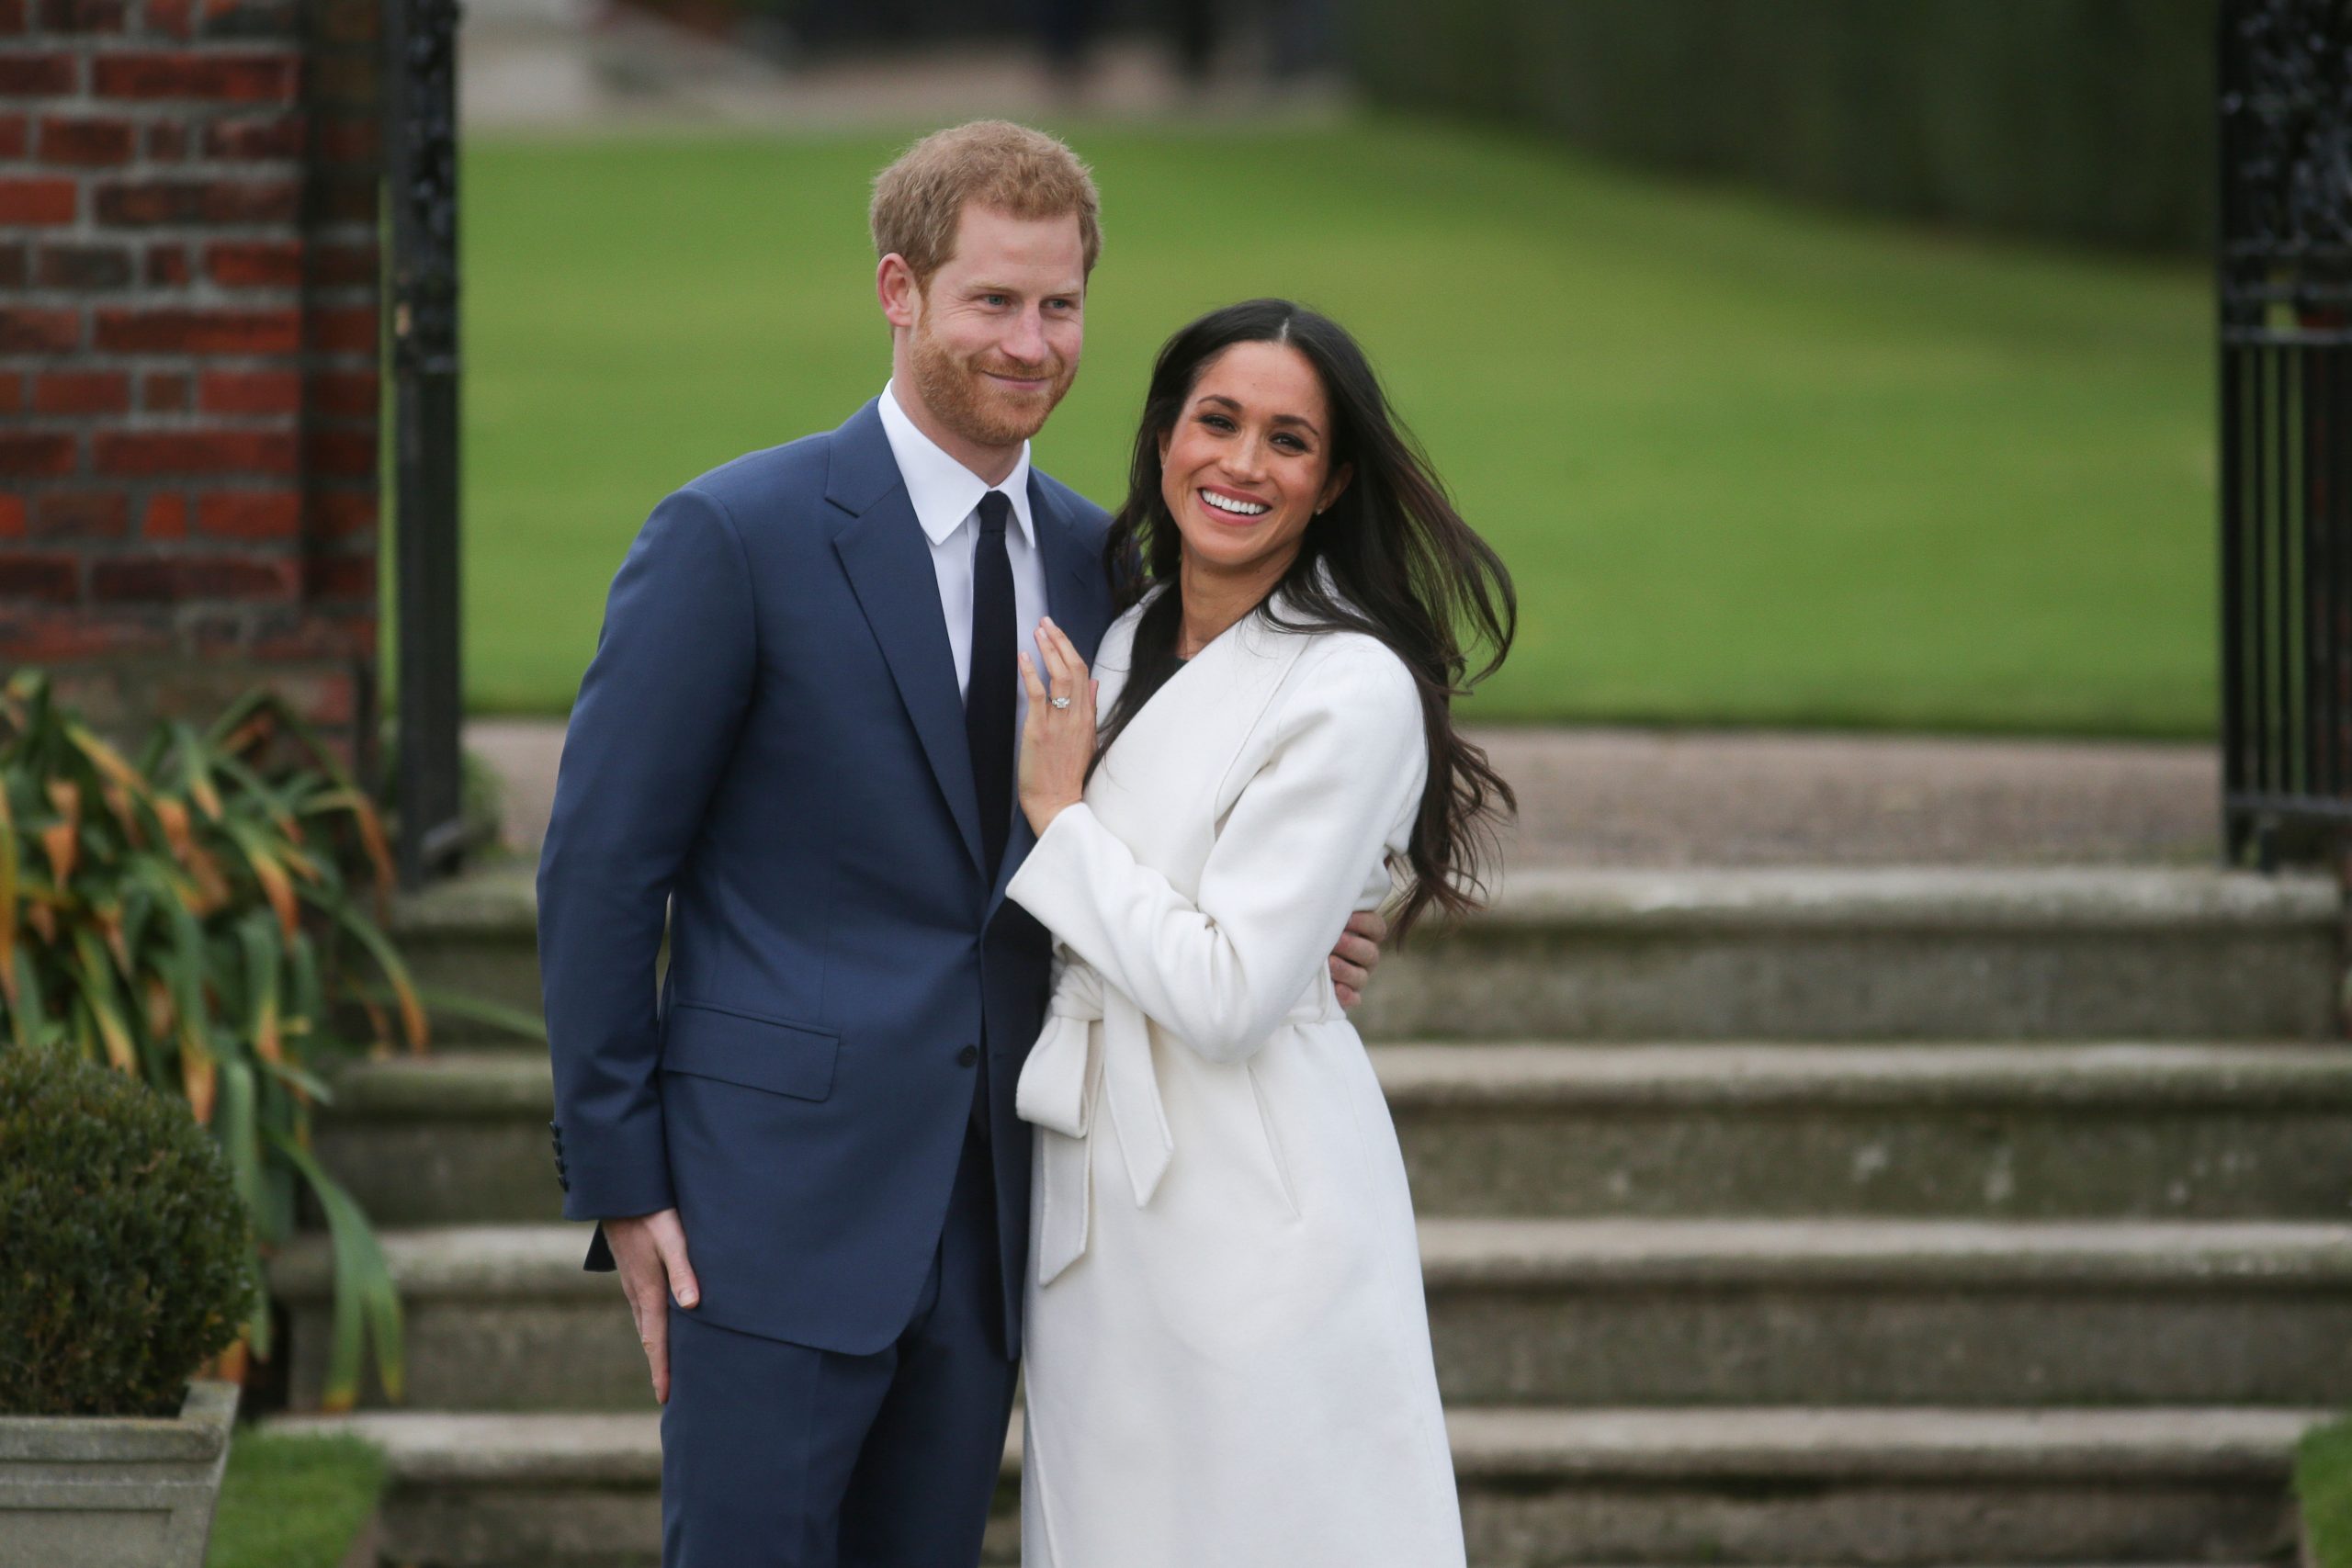 ‘I was the most trolled person in the entire world in 2019,’ says Meghan Markle